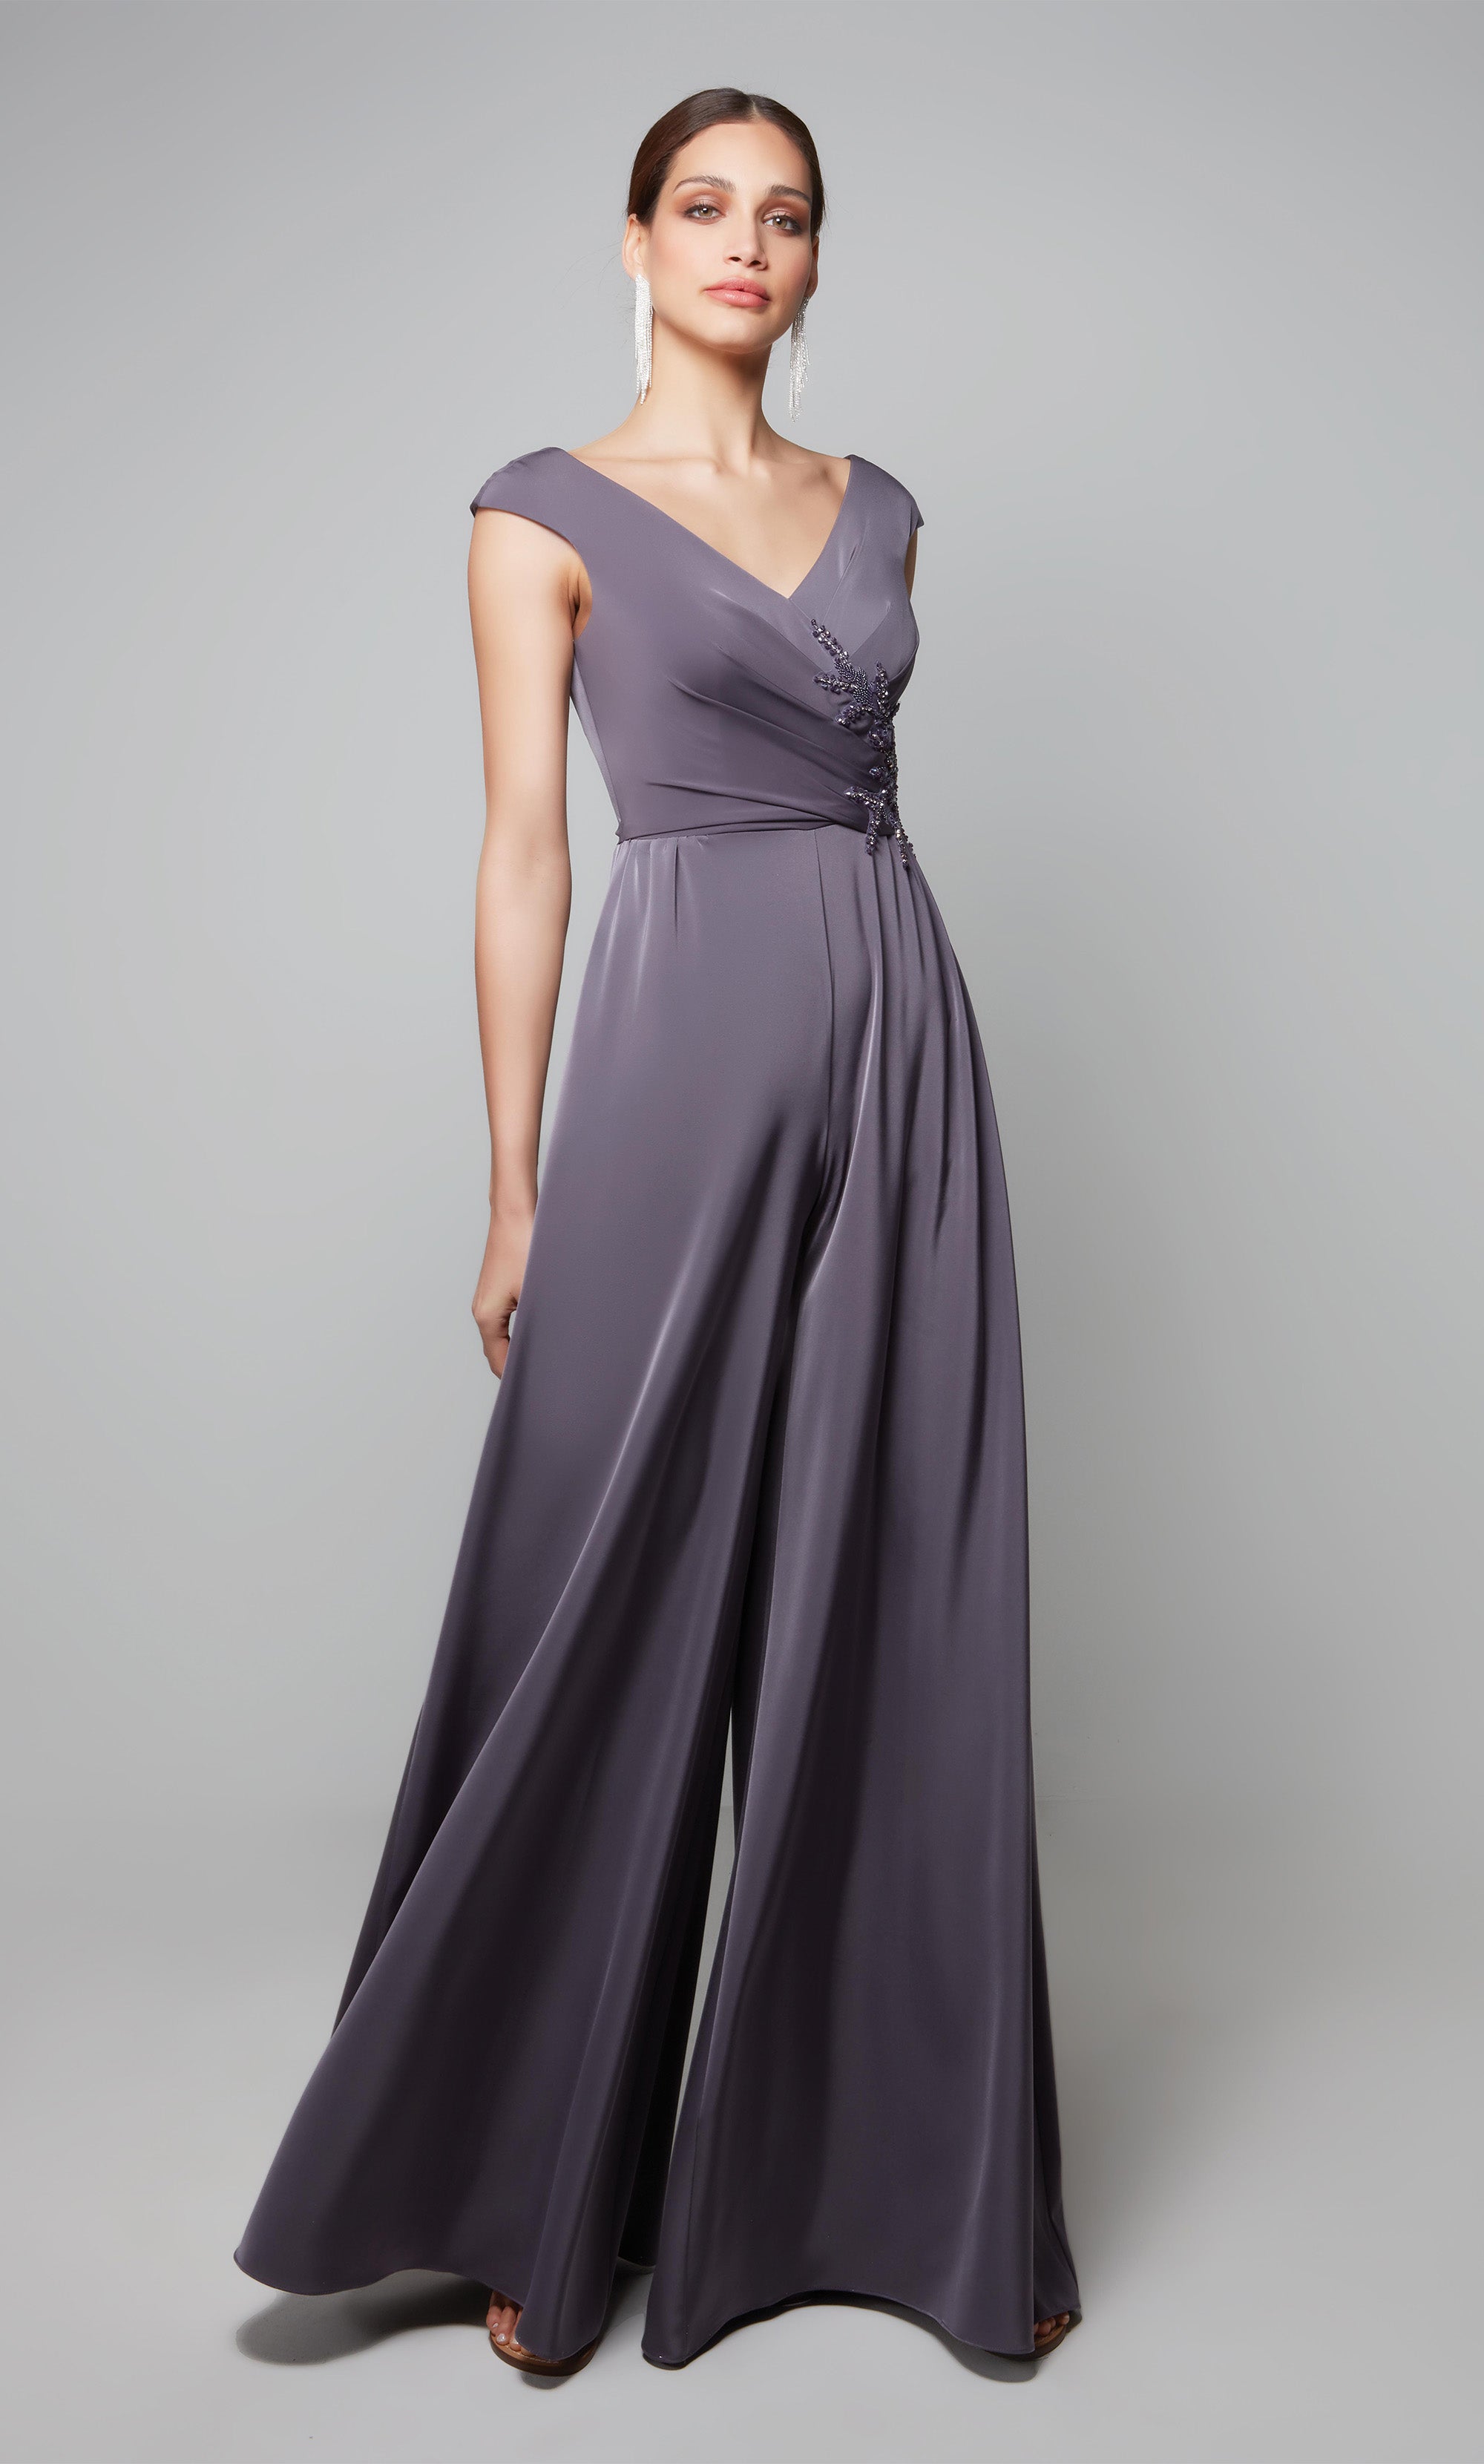 Chic Chiffon One Shoulder Jumpsuit with Flounced Neckline